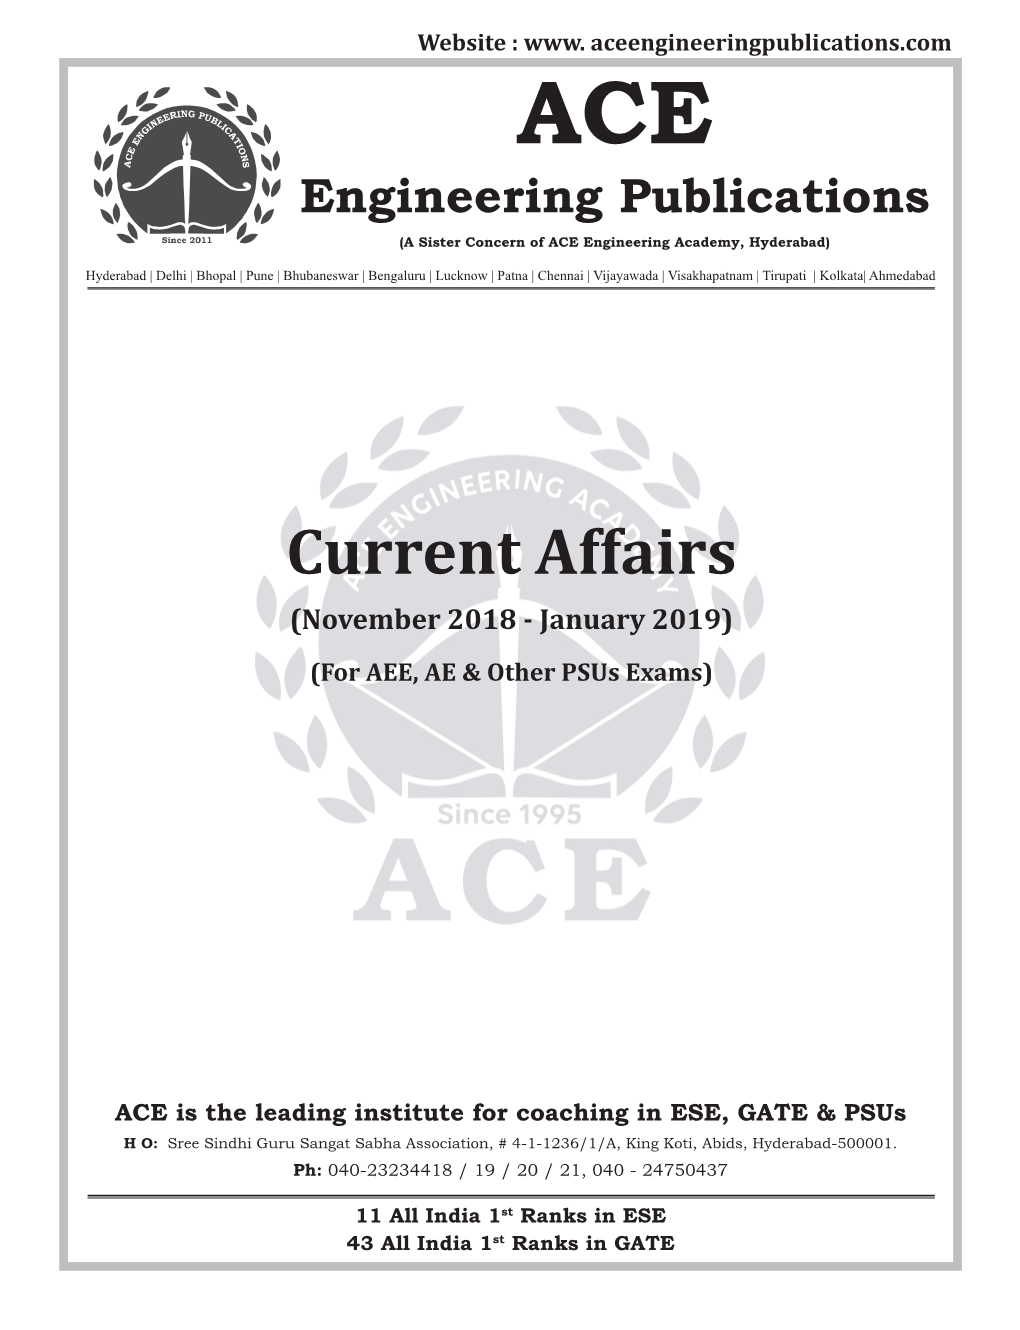 Current Affairs (November 2018 - January 2019) (For AEE, AE & Other Psus Exams)